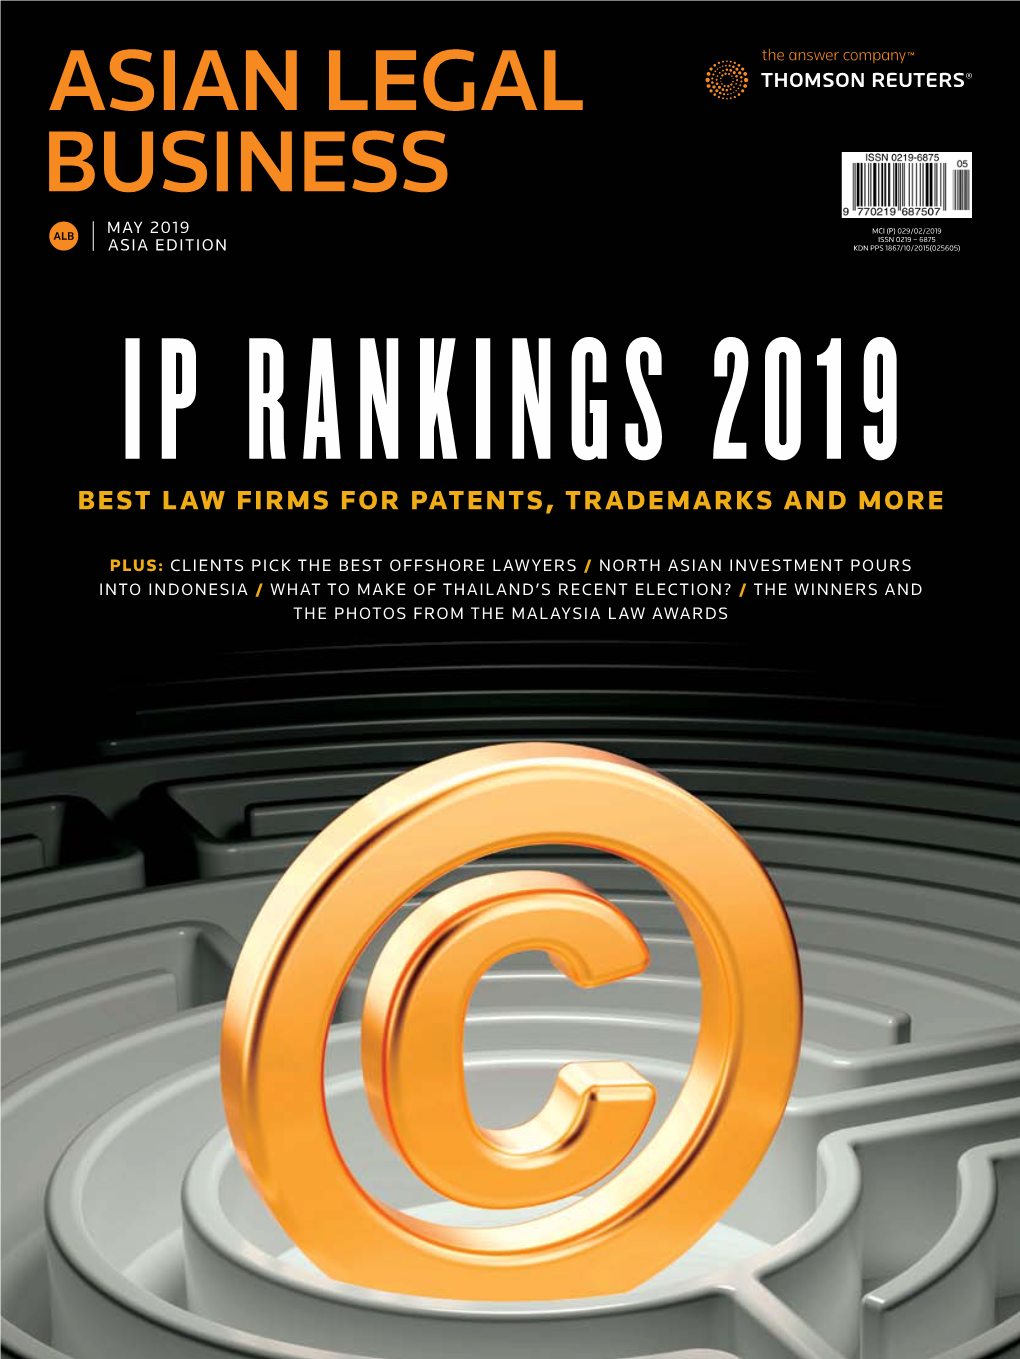 Best Law Firms for Patents, Trademarks and More